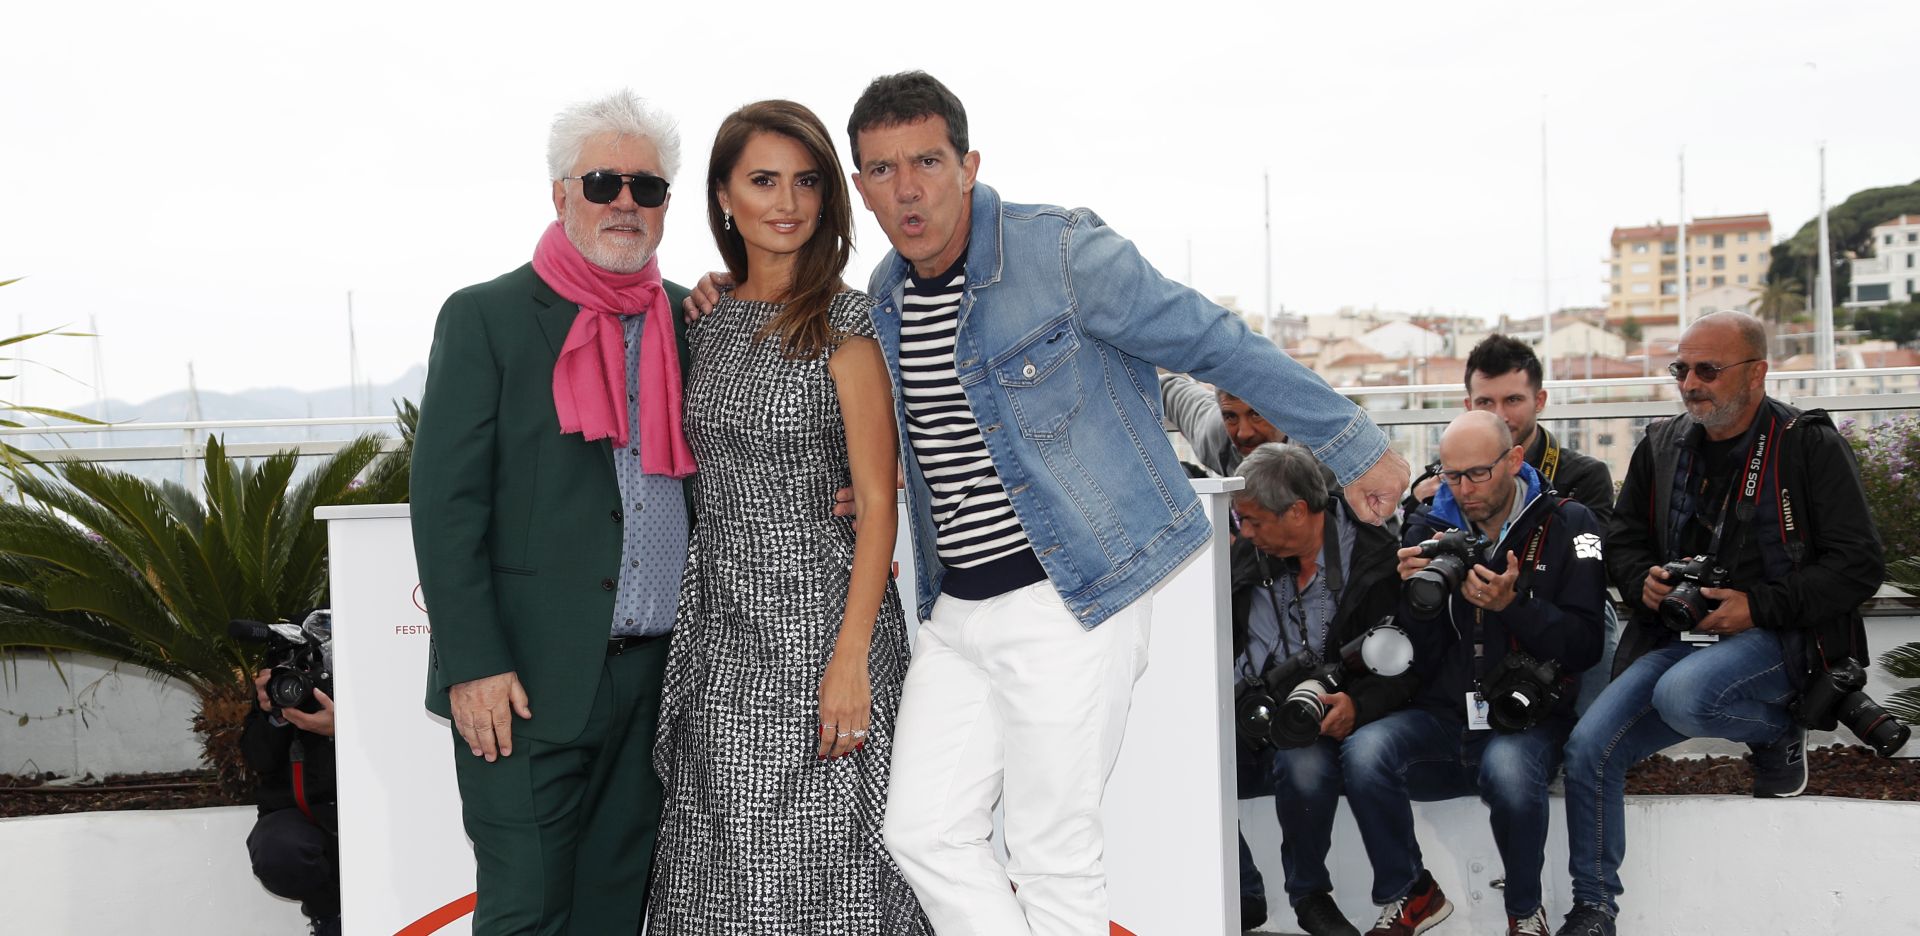 epa07580158 (L-R) Spanish director Pedro Almodovar, Spanish actress Penelope Cruz and Spanish actor Antonio Banderas pose during the photocall for 'Dolor y Gloria' (Pain and Glory) at the 72nd annual Cannes Film Festival, in Cannes, France, 18 May 2019. The movie is presented in the Official Competition of the festival which runs from 14 to 25 May.  EPA/GUILLAUME HORCAJUELO